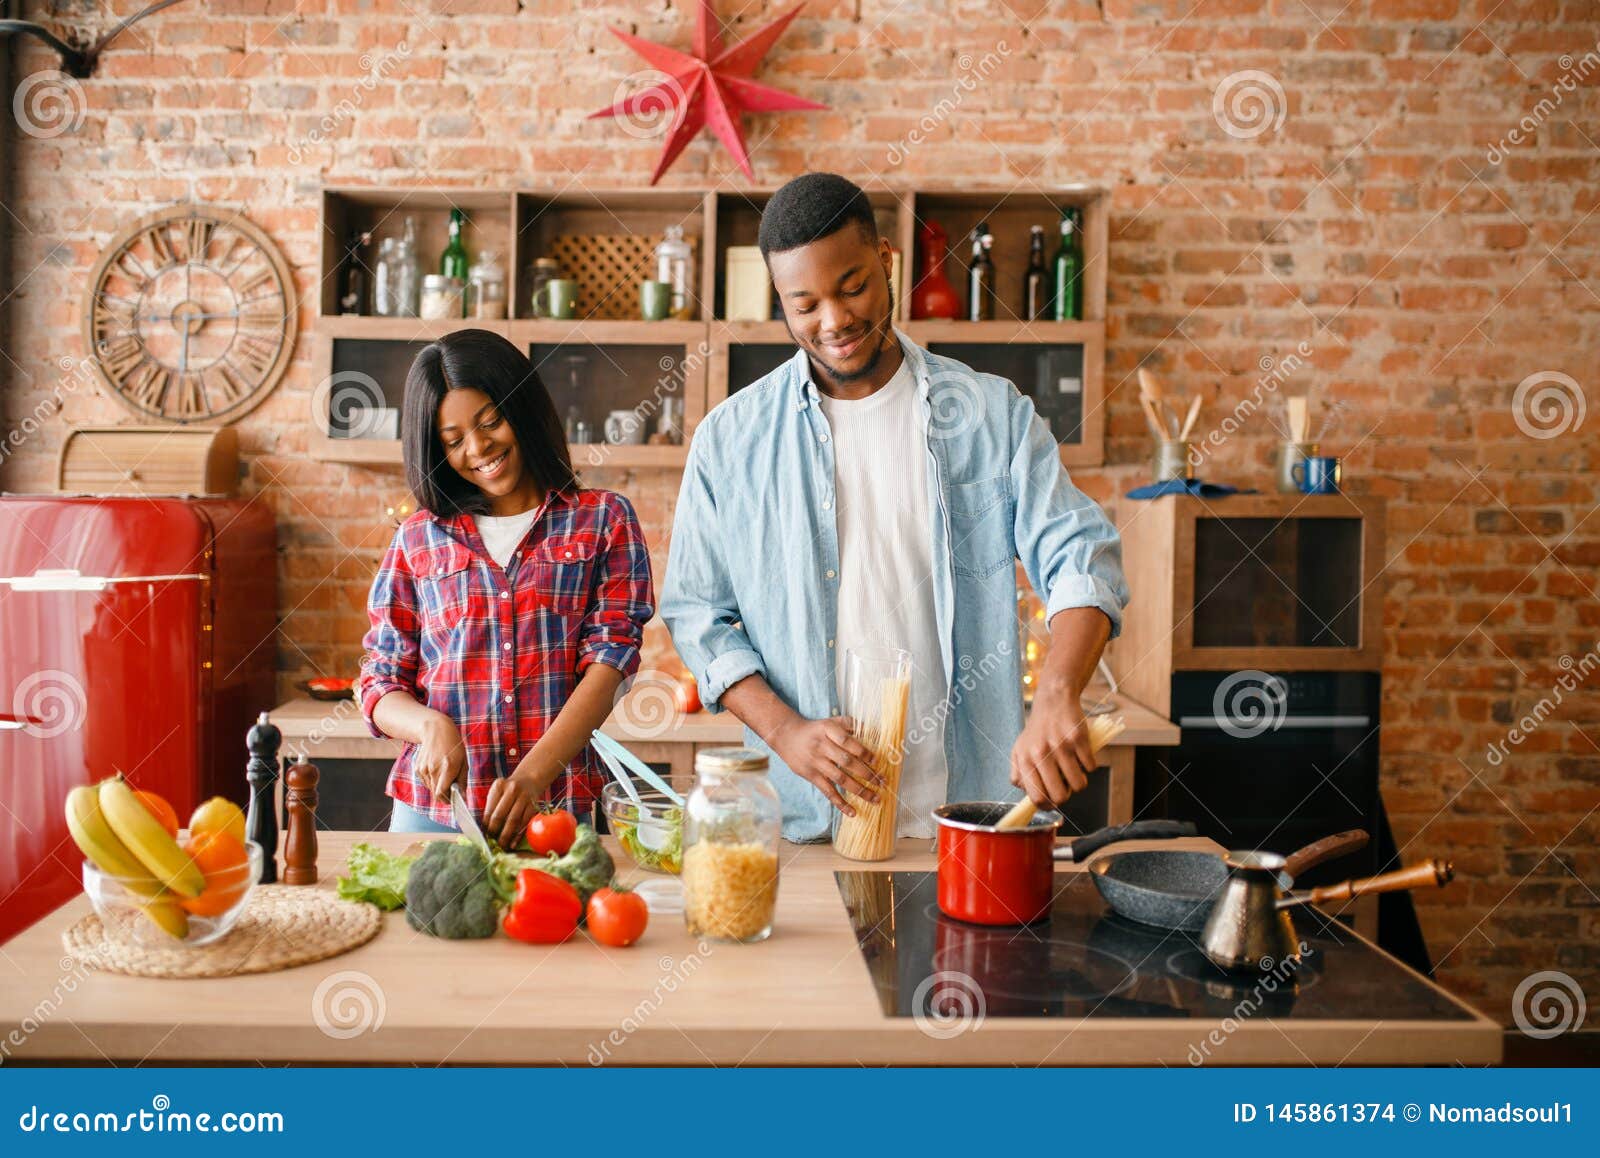 Black Love Couple Cooking Romantic Dinner Stock Photo Image Of Cooking Healthy 145861374